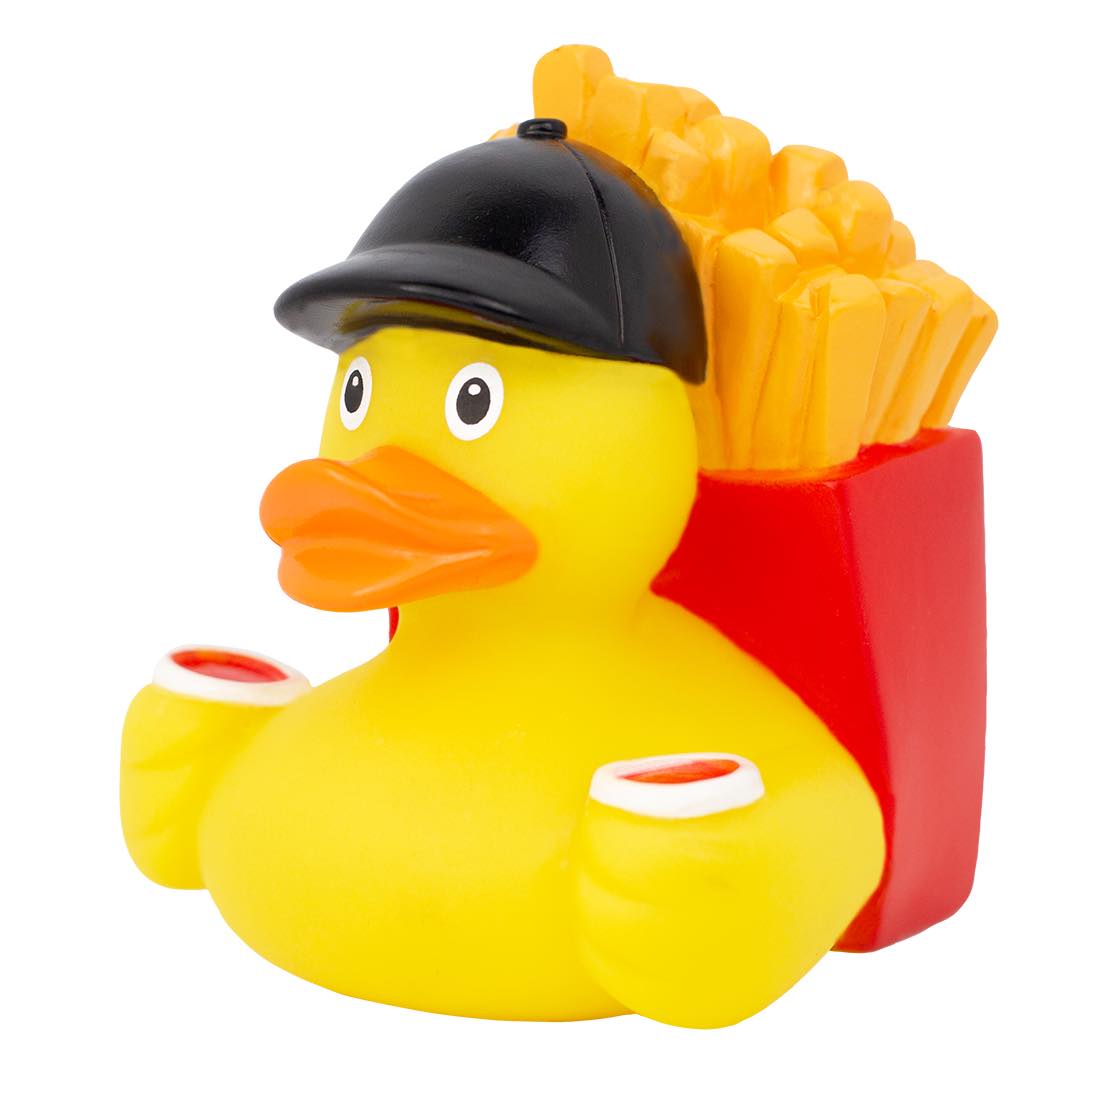 French Fries Rubber Duck | Buy premium rubber ducks online - world wide  delivery!